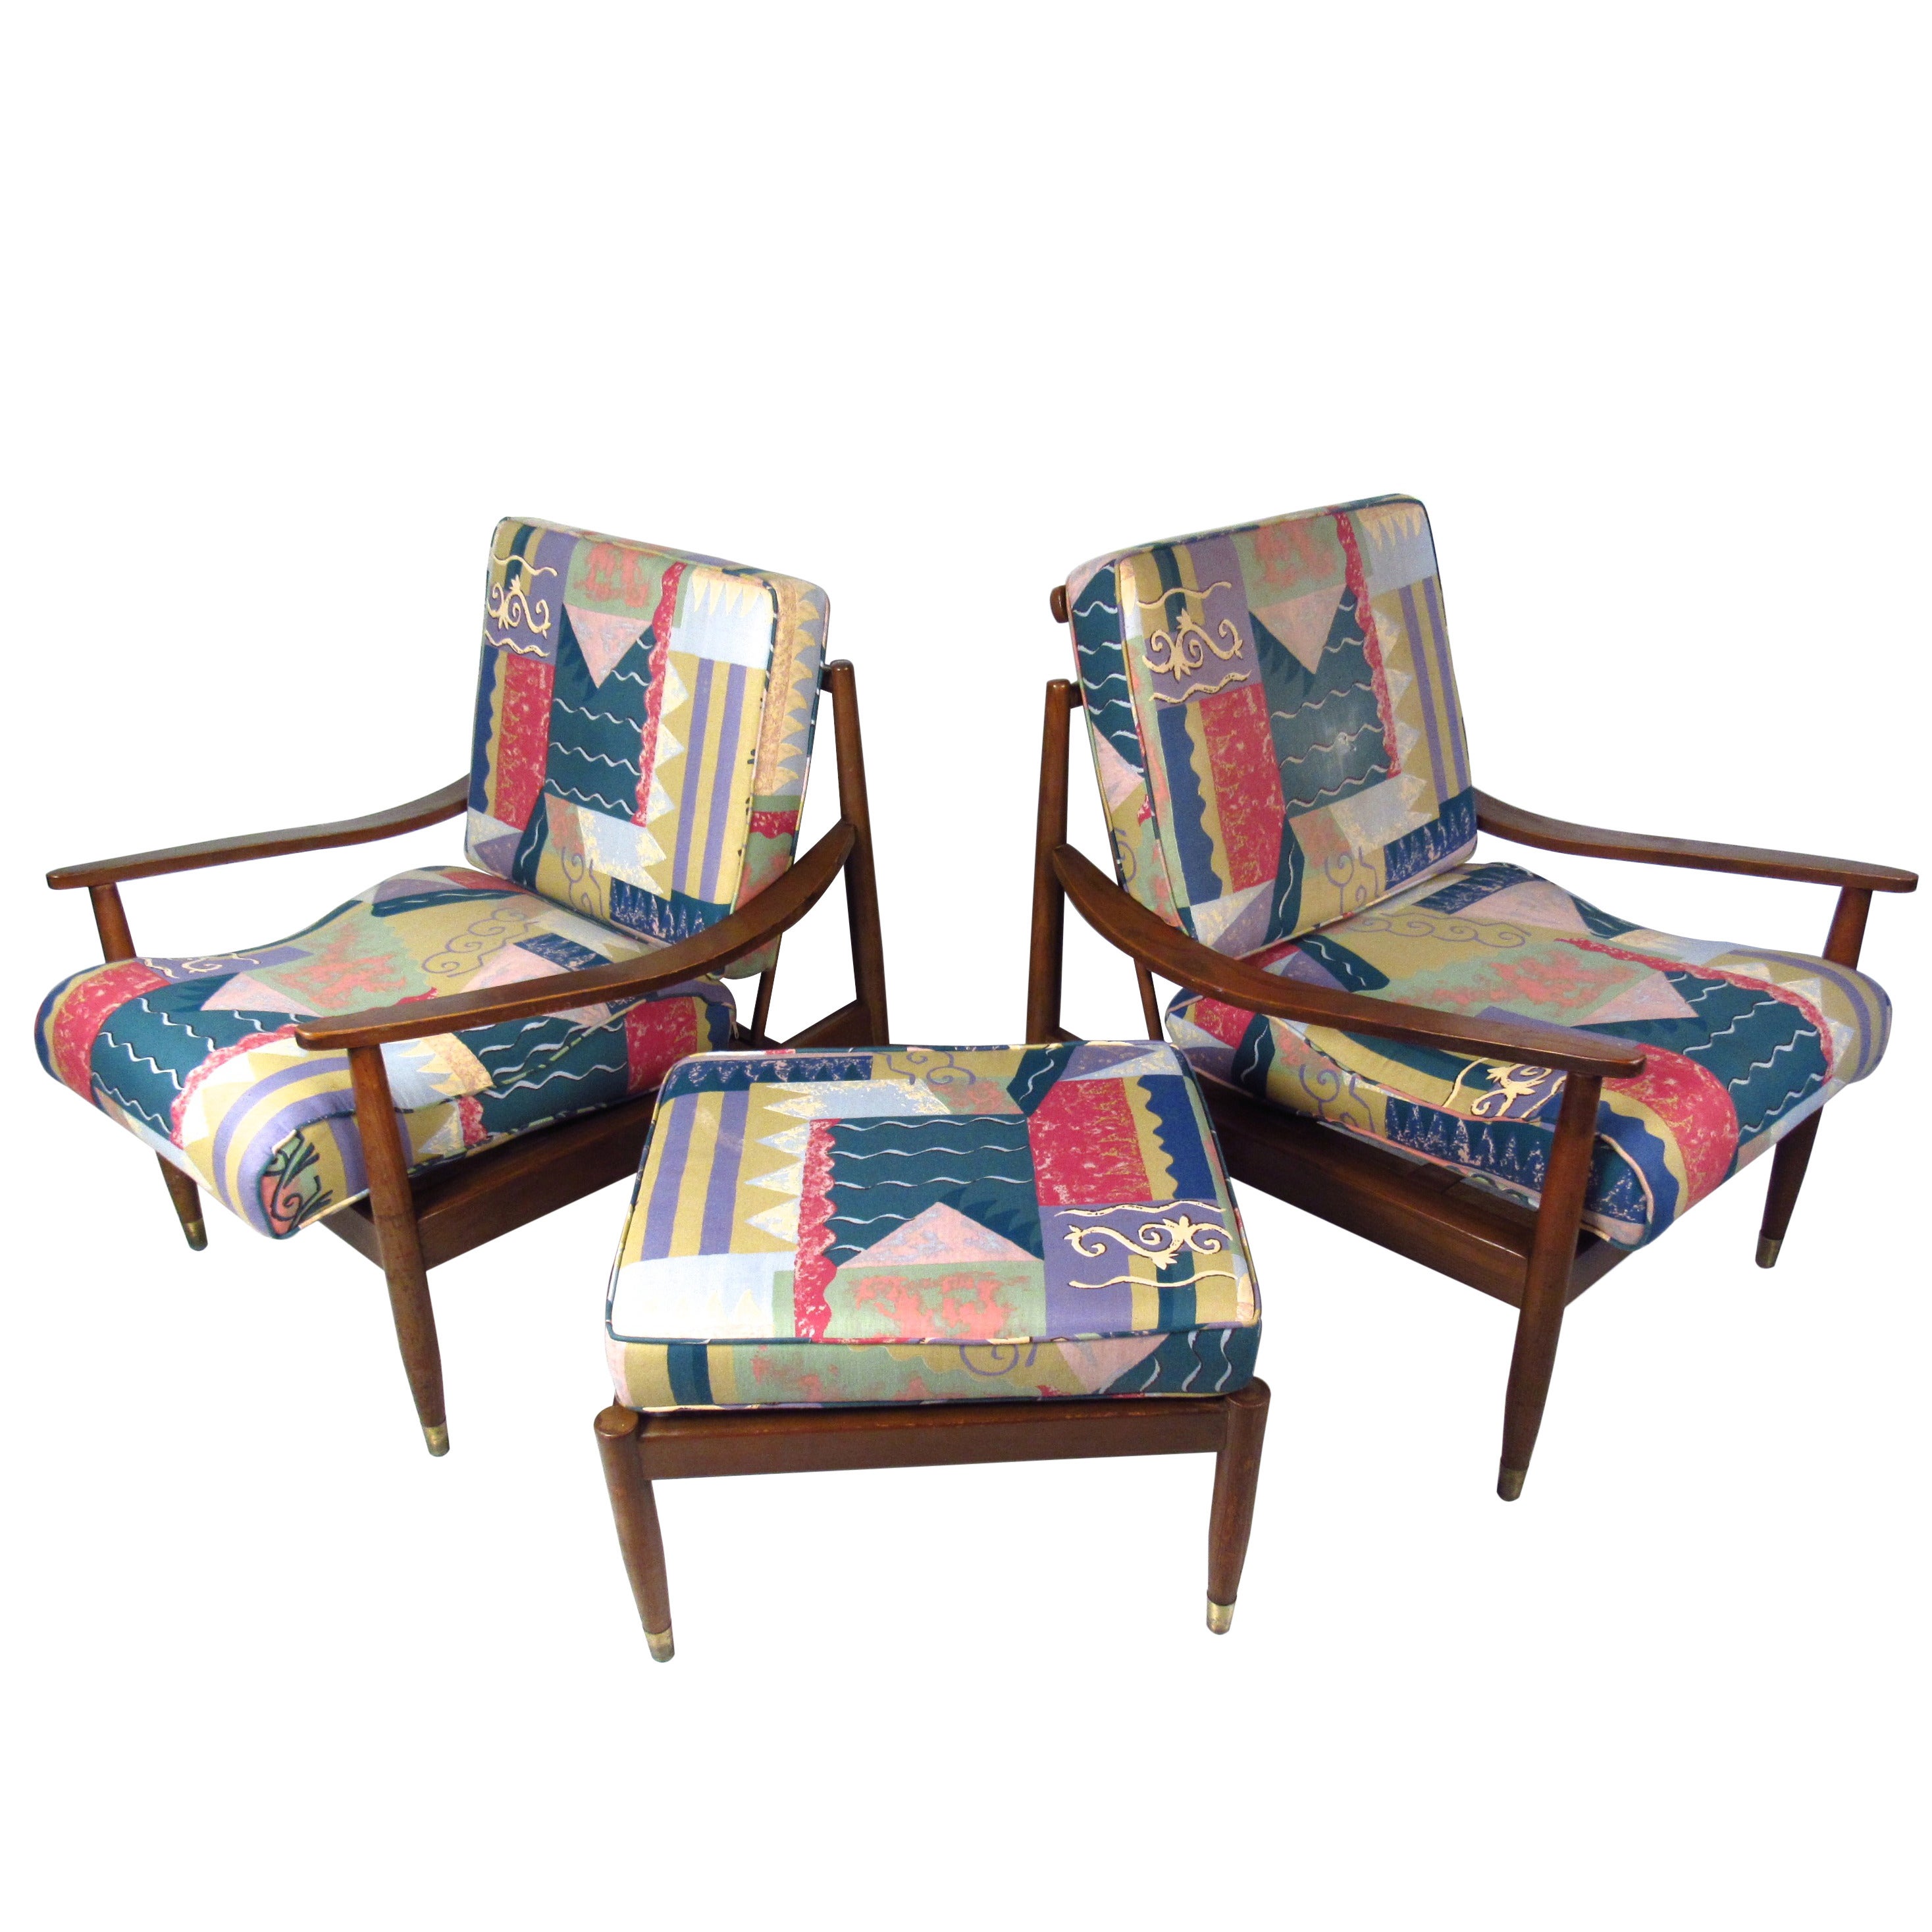 Pair of Mid-Century Modern Lounge Chairs with Matching Ottoman